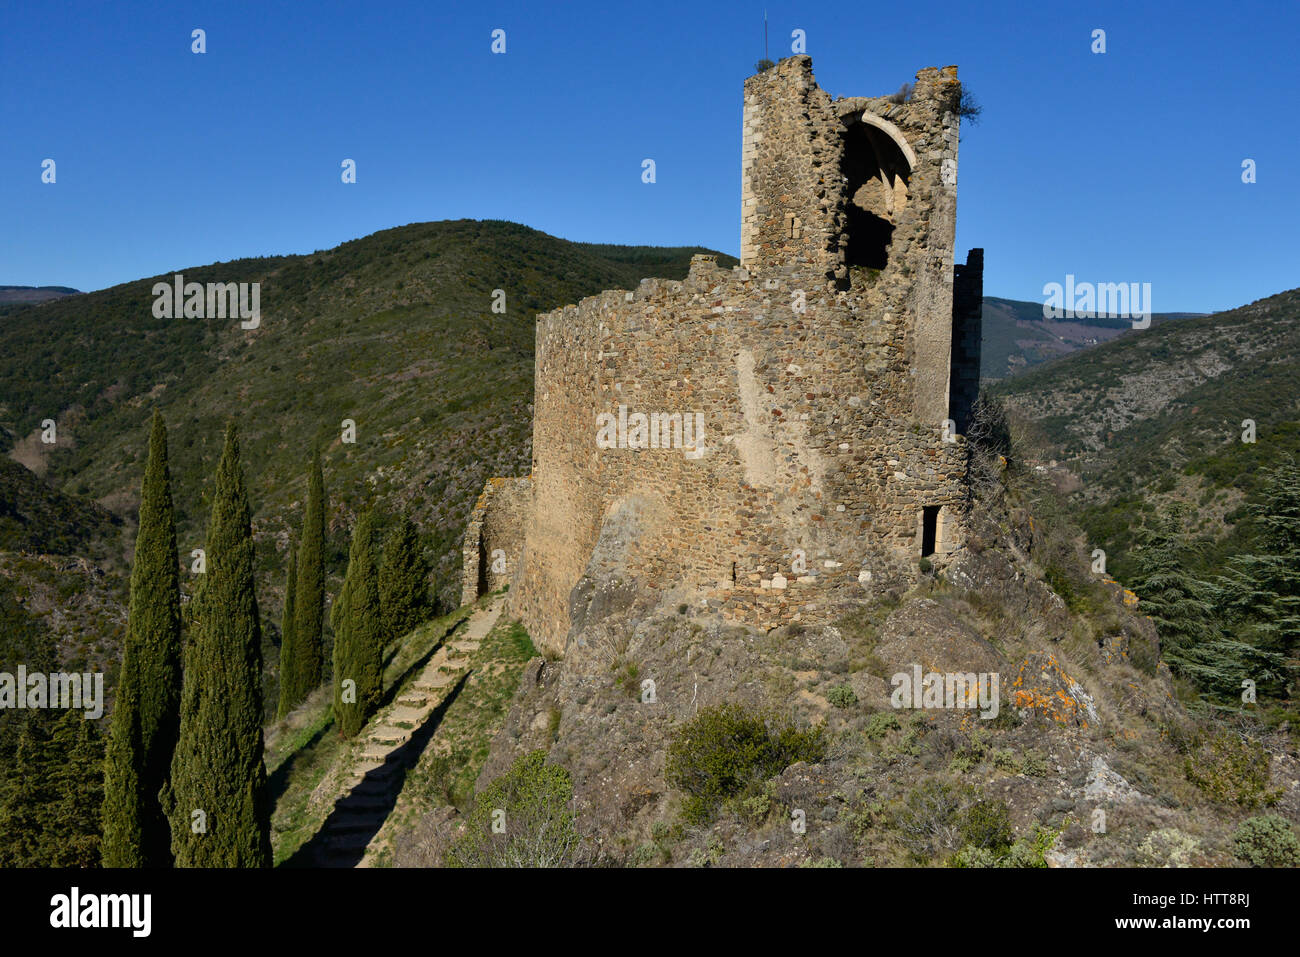 One of the ruined castle towers of Lastours in the Occitanie region of Southern France. Stock Photo